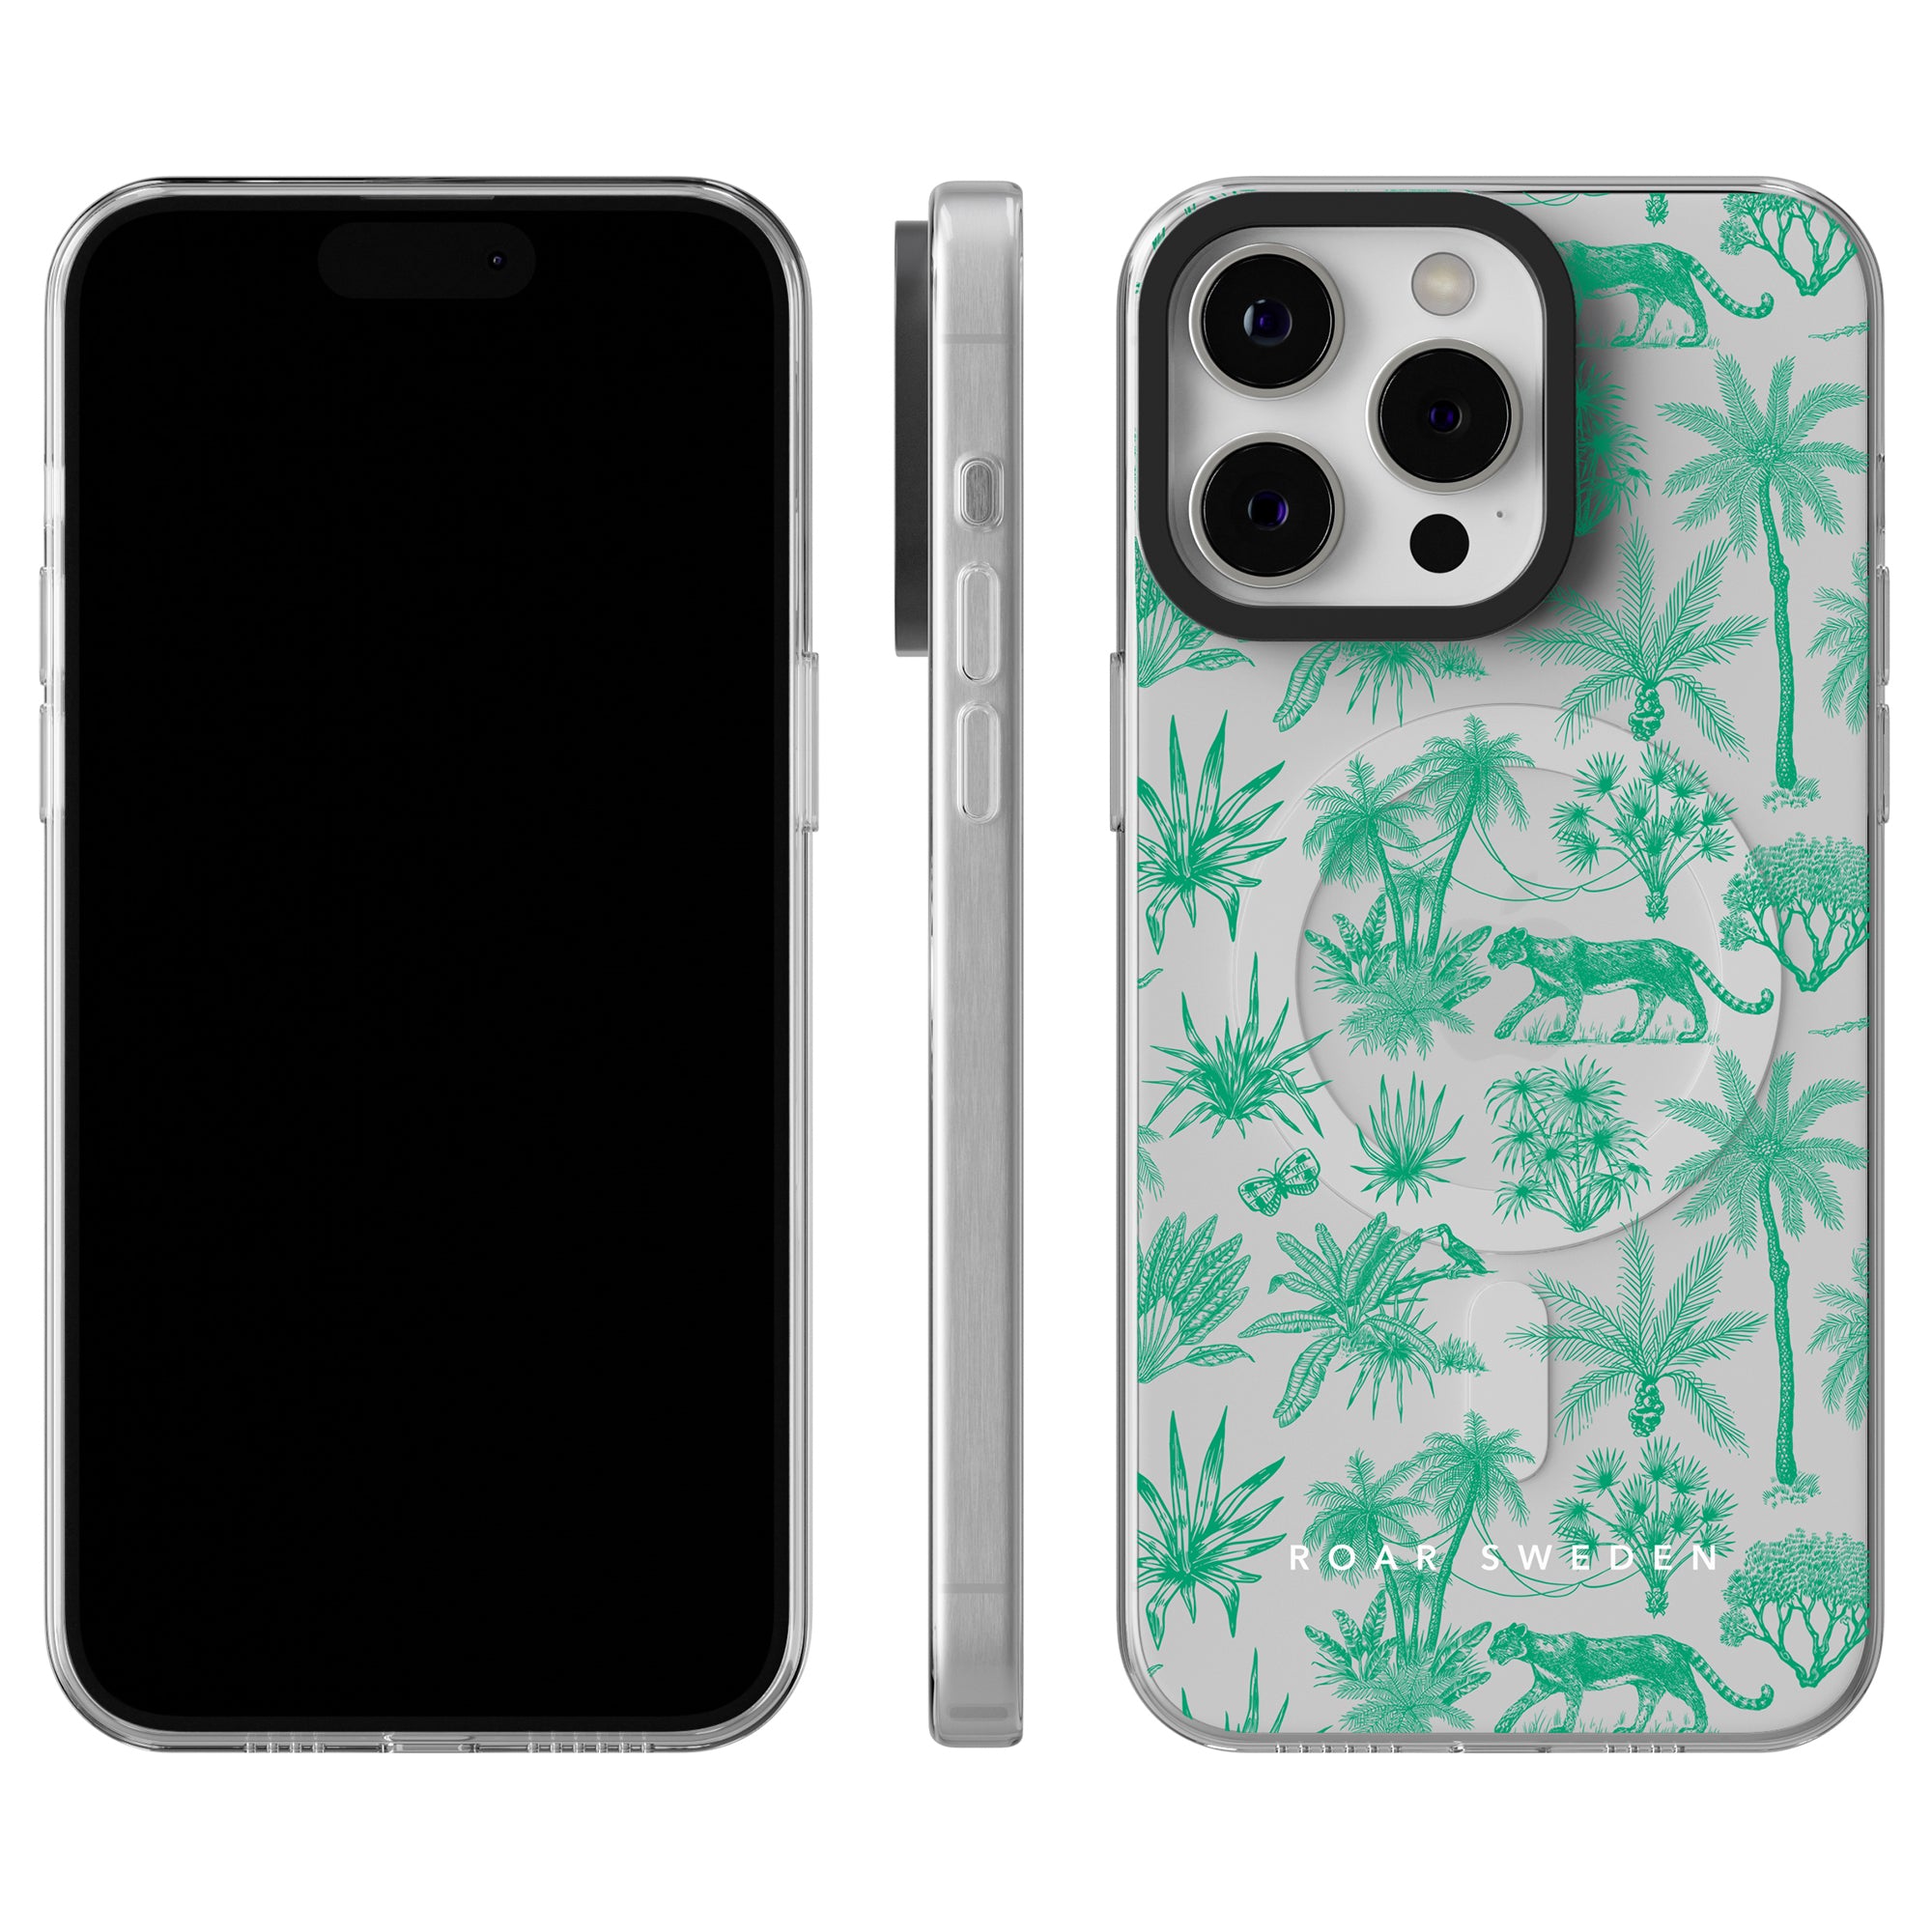 The Toile De Jouy Mint - MagSafe showcases front, back, and side views. The back has a white case with a Toile De Jouy-inspired design featuring a green, jungle-themed motif of various plants and a tiger. This elegant theme seamlessly integrates with MagSafe technology for perfect functionality.